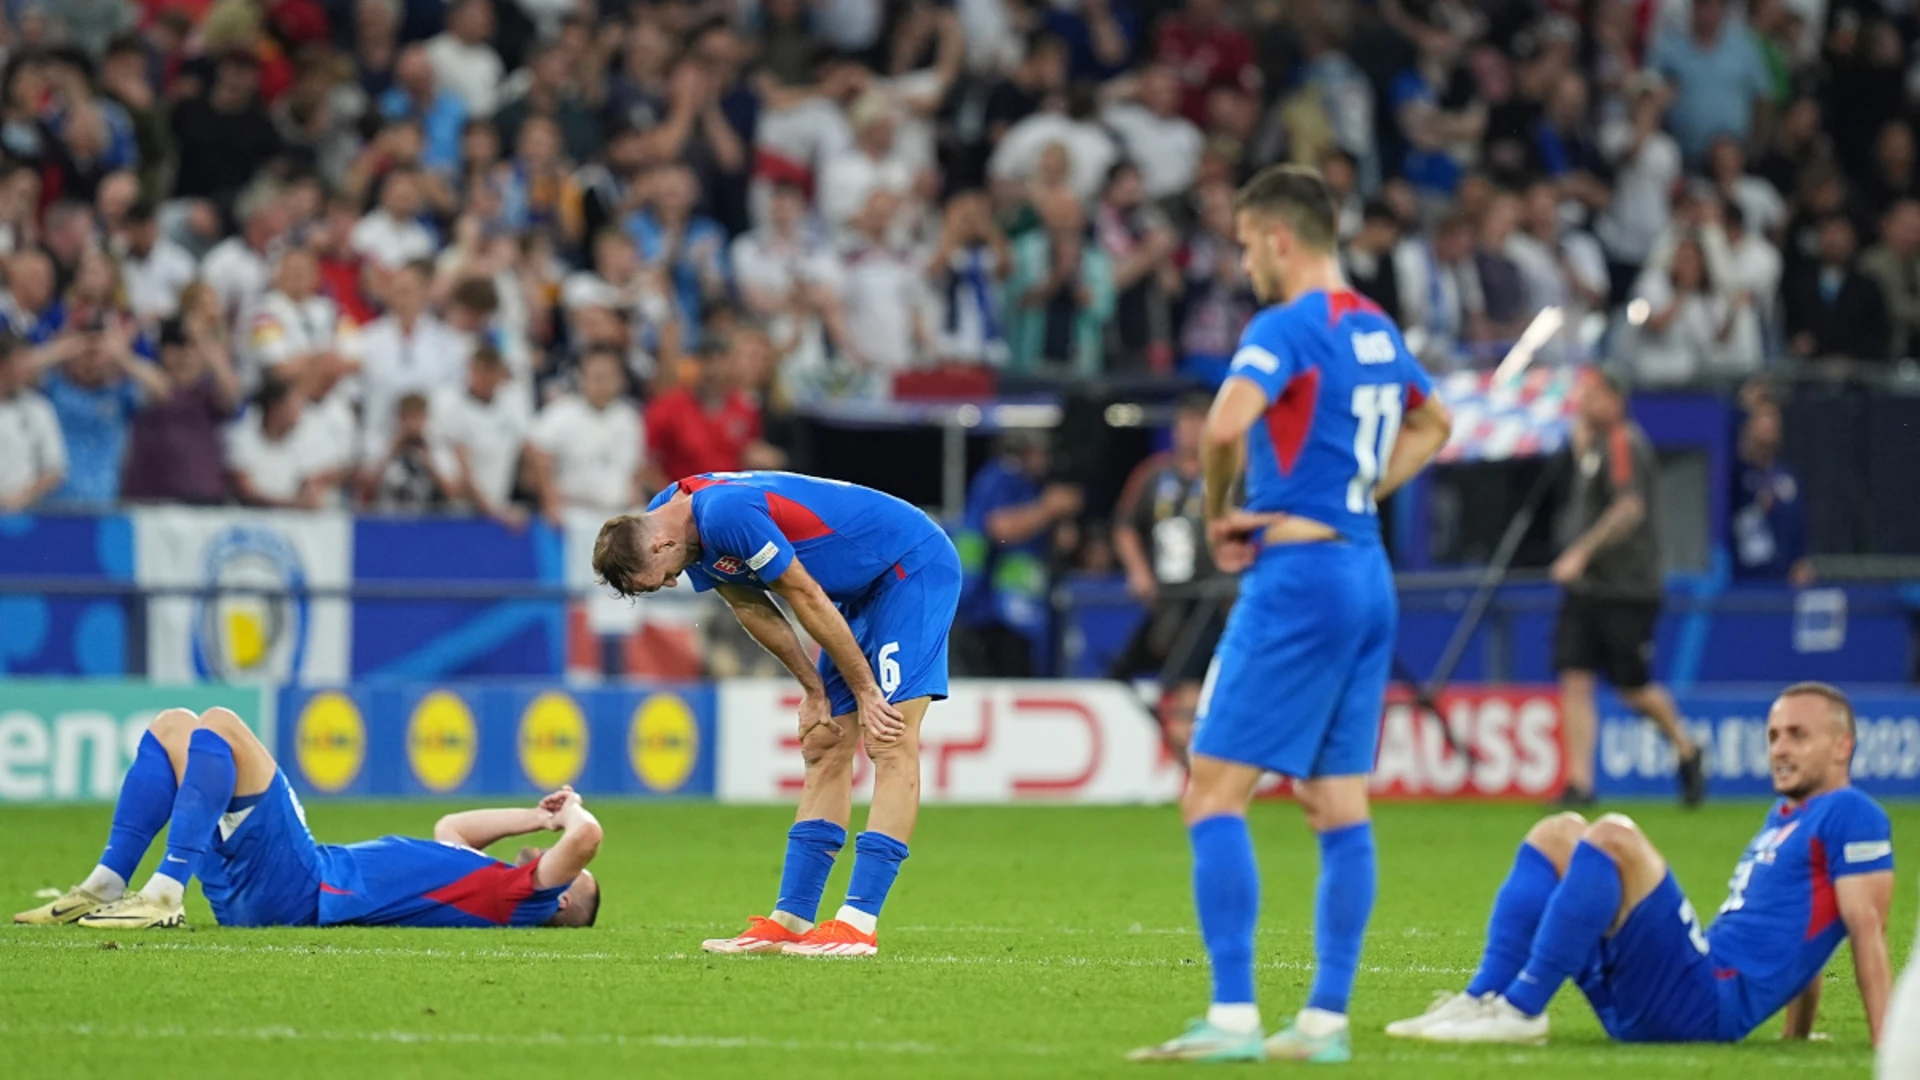 Slovakia impress at both ends of the pitch